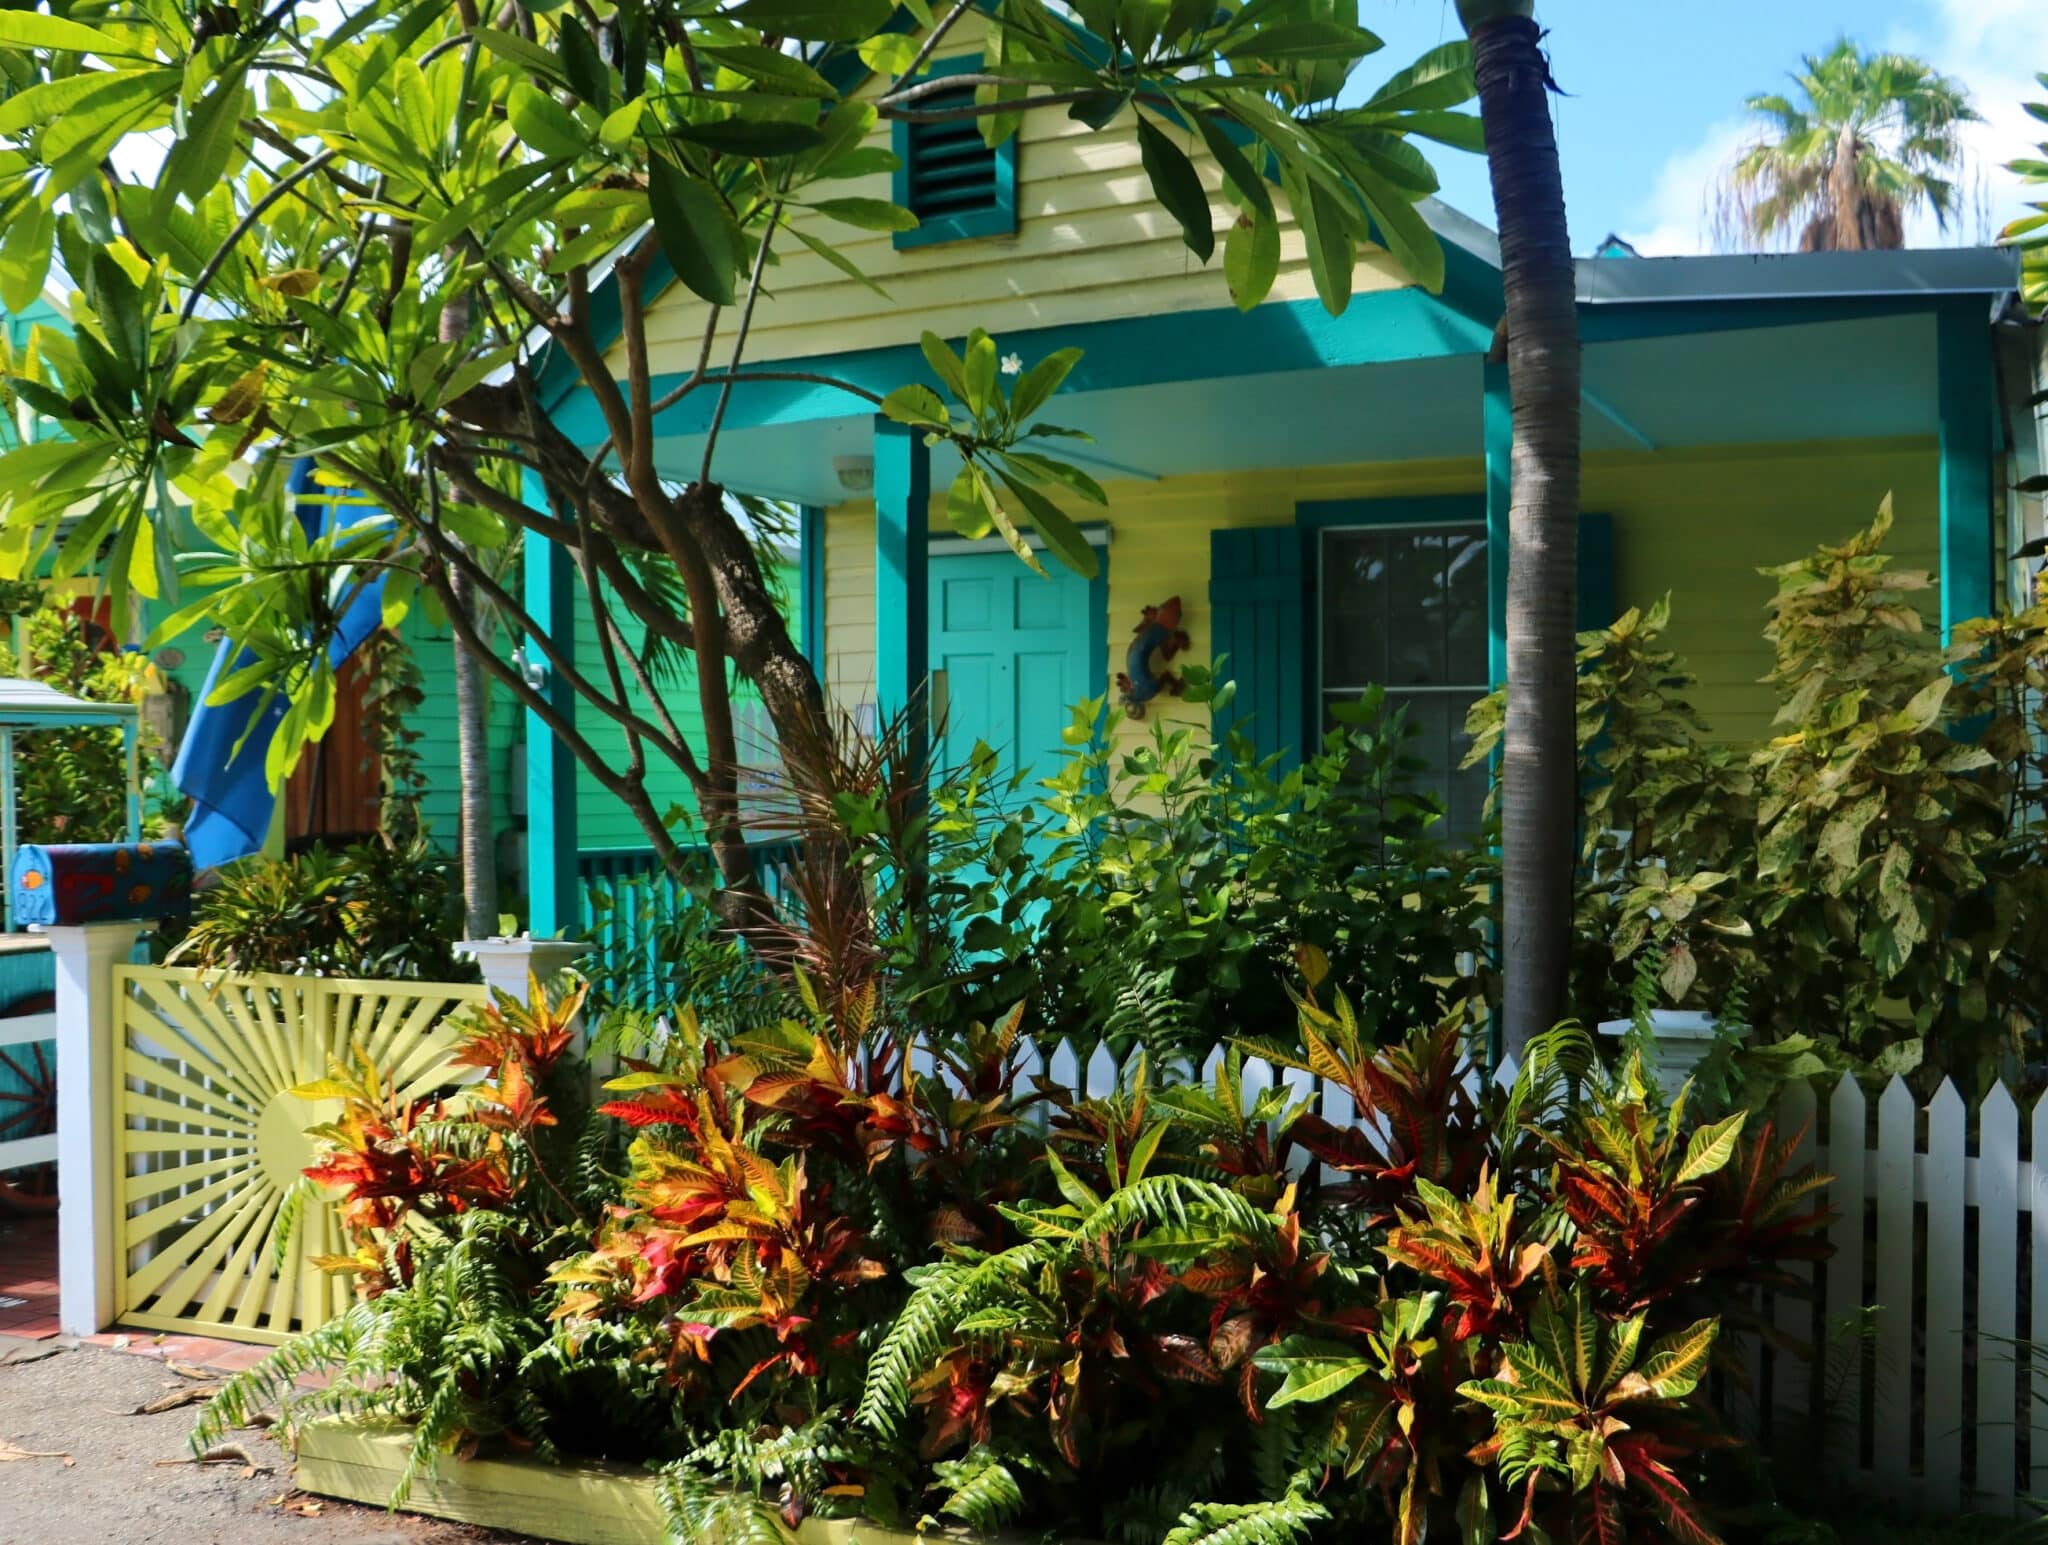 One of many cozy bungalows along side streets of Key West (Credit: Bill Rockwell)